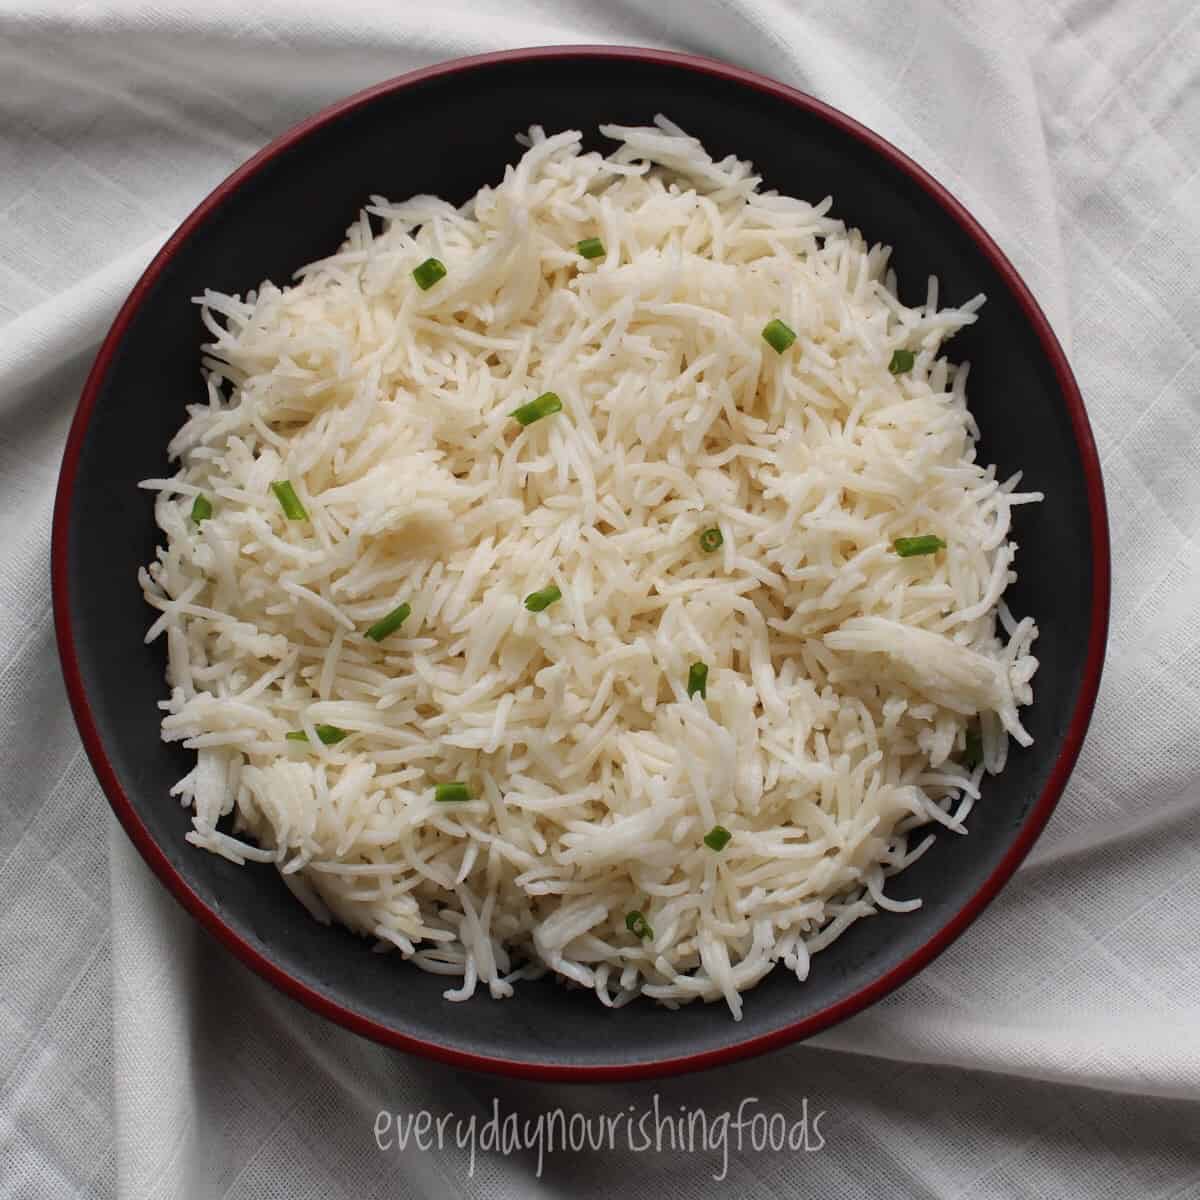 Basmati rice in an instant bowl